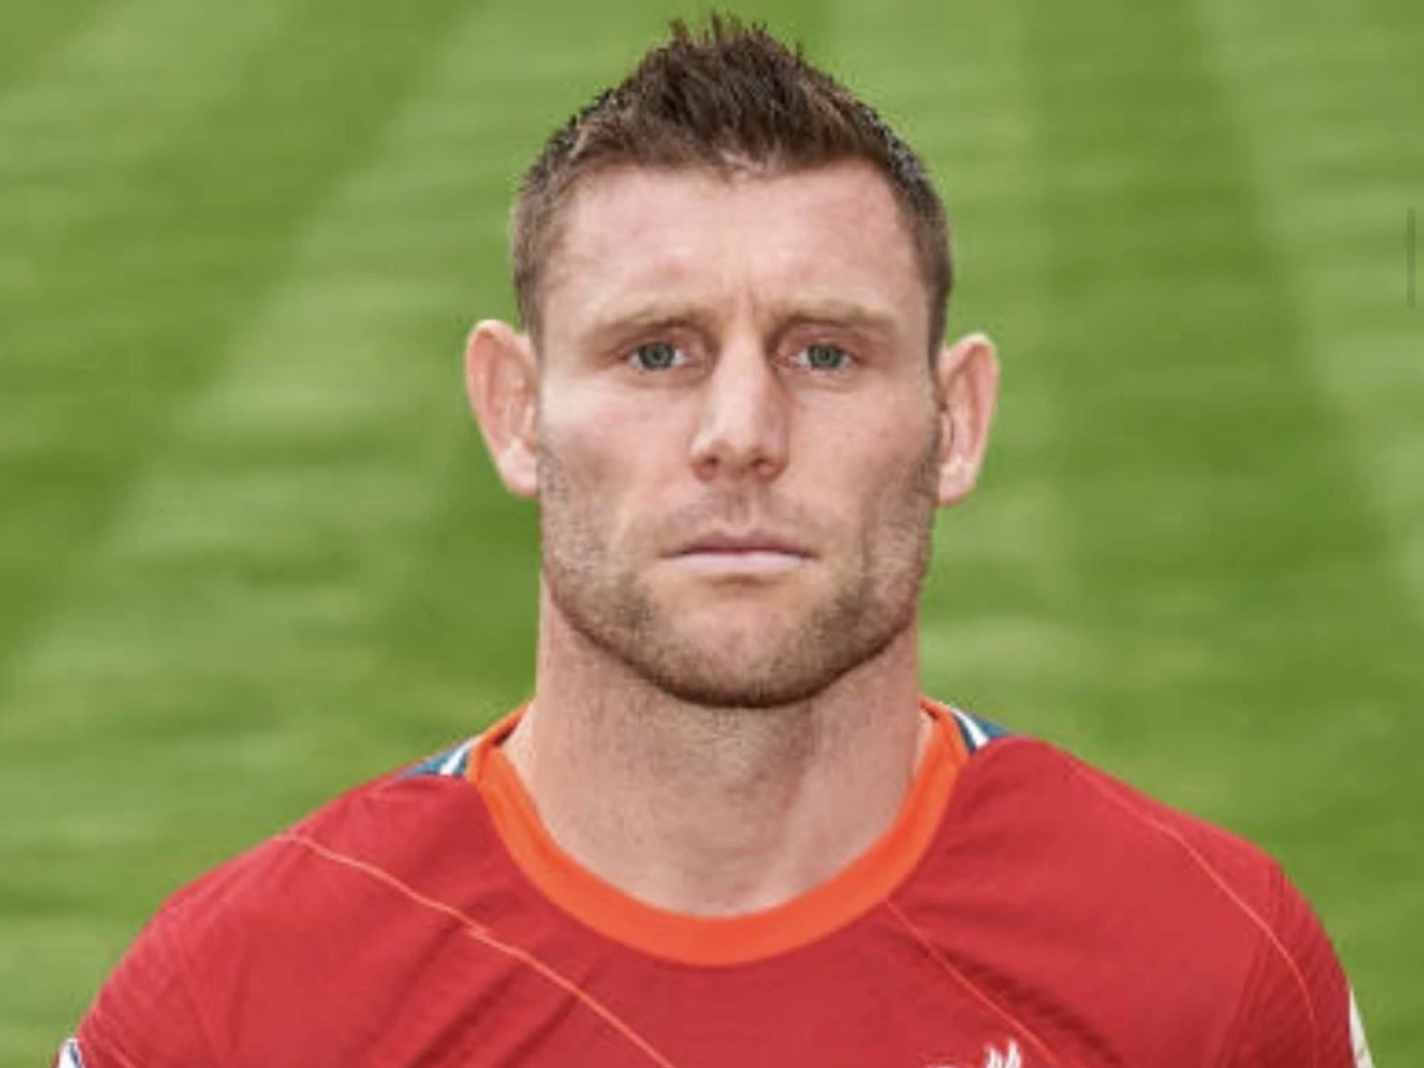 This photo of James Milner is the face of peak masculinity